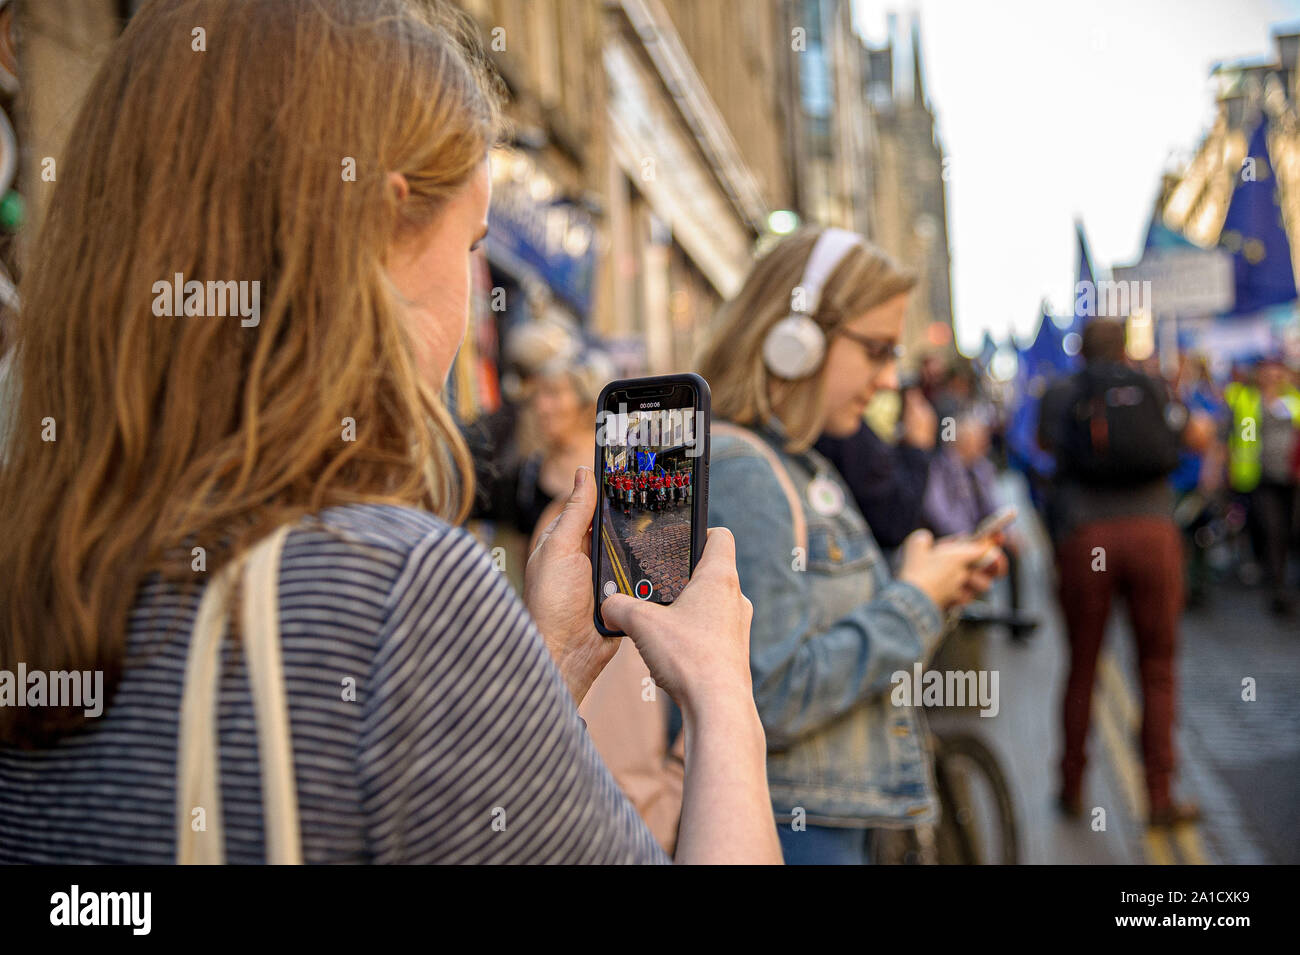 Bystanders are seen taking photos of the protesters on their phones during the demonstration.Organized by European Movement in Scotland as well as Edinburgh For Europe, protesters took to the streets of Edinburgh to demand MPs revoke Article 50 to prevent a no-deal and that the EU shares a notion to combat climate change. Stock Photo